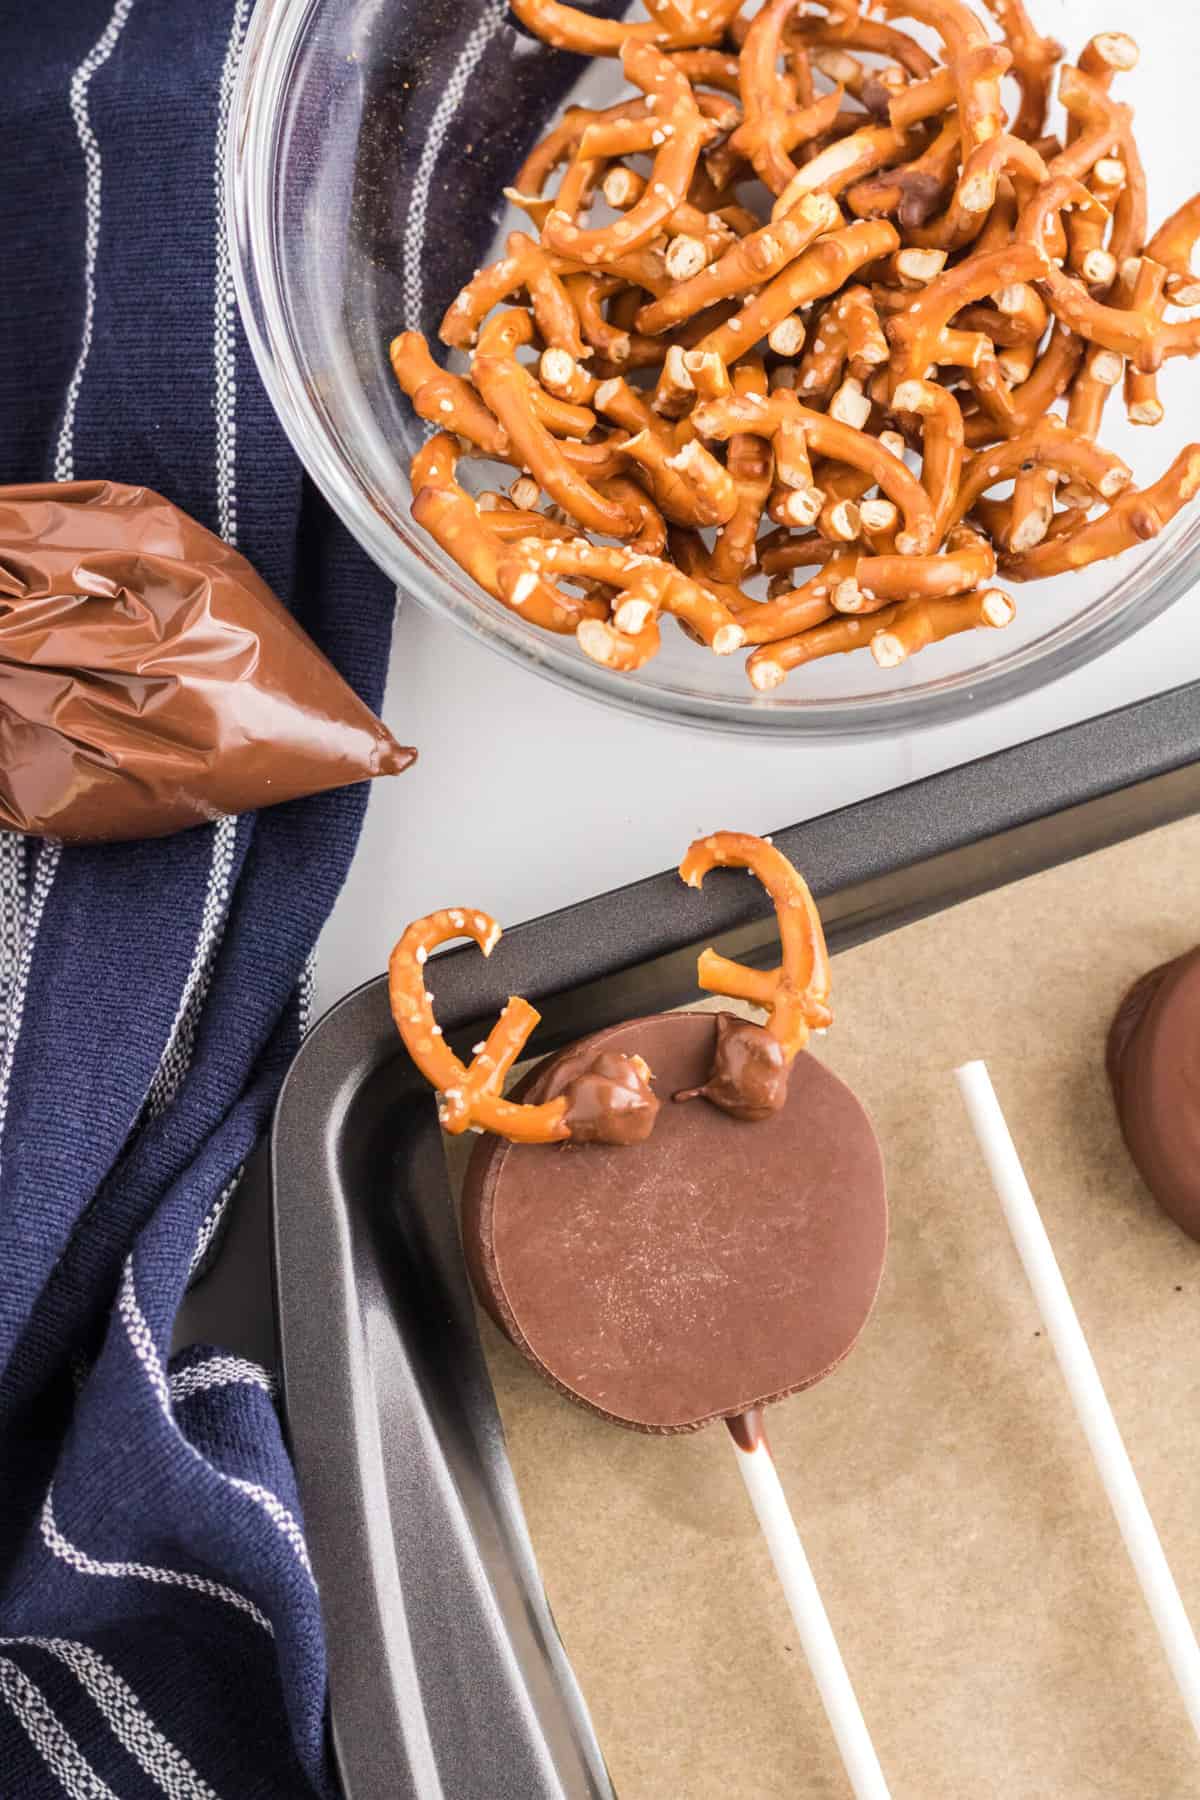 Place remaining Melted Chocolate in a Piping Bag and cut the End of it. Peel the Oreo Cookie Off of the Parchment paper and attache the Pretzels on the back with the remaining Melted Chocolate.